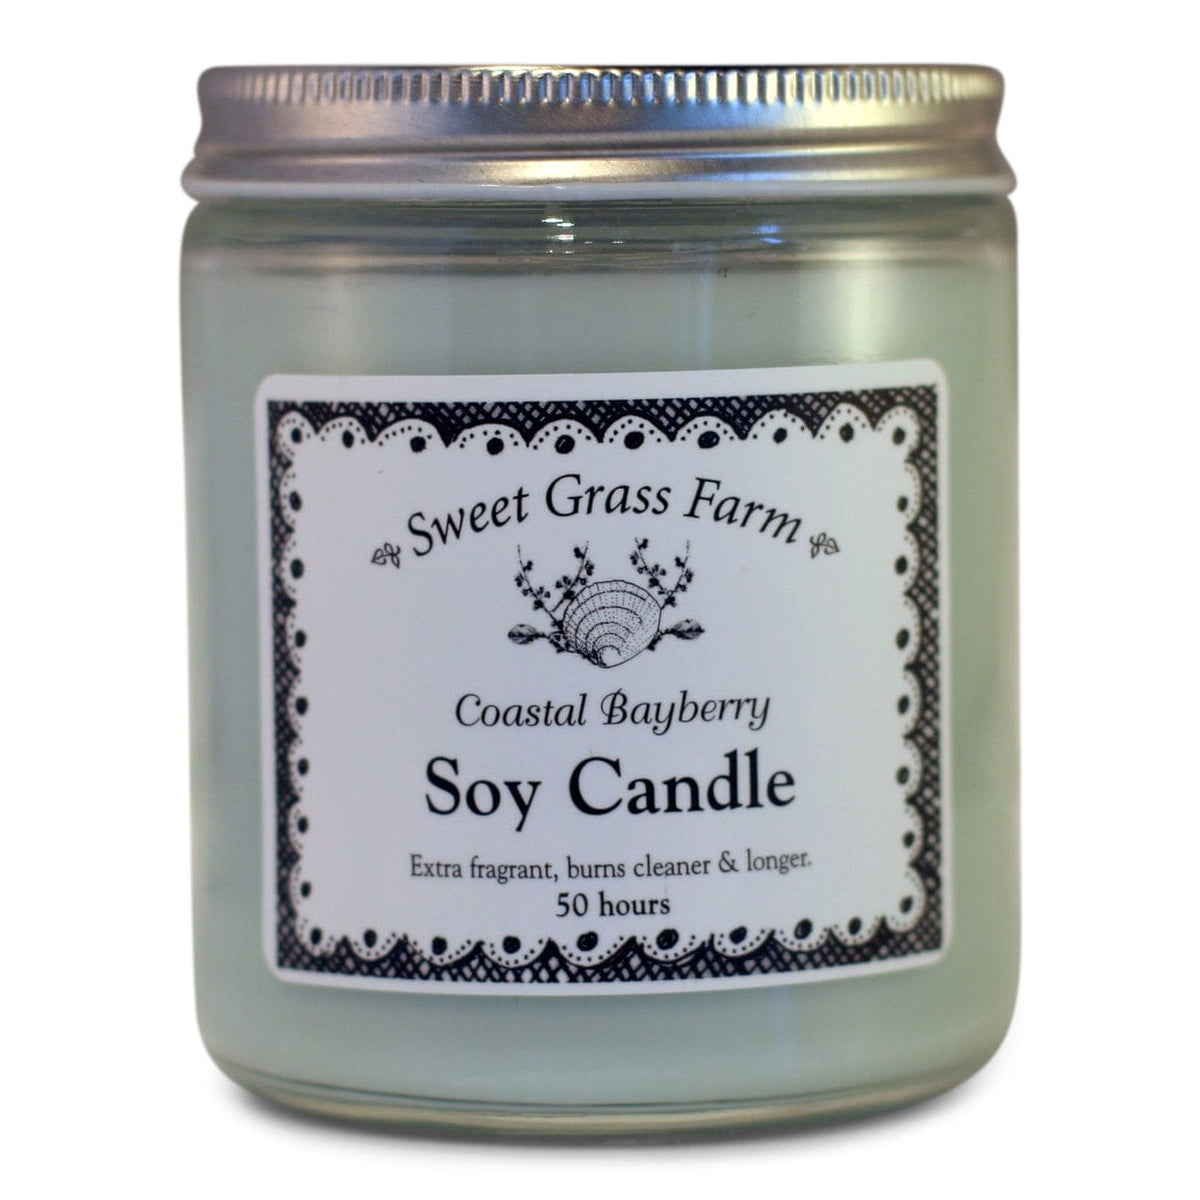 Sweet Grass Farm Coastal Bayberry Soy Candle